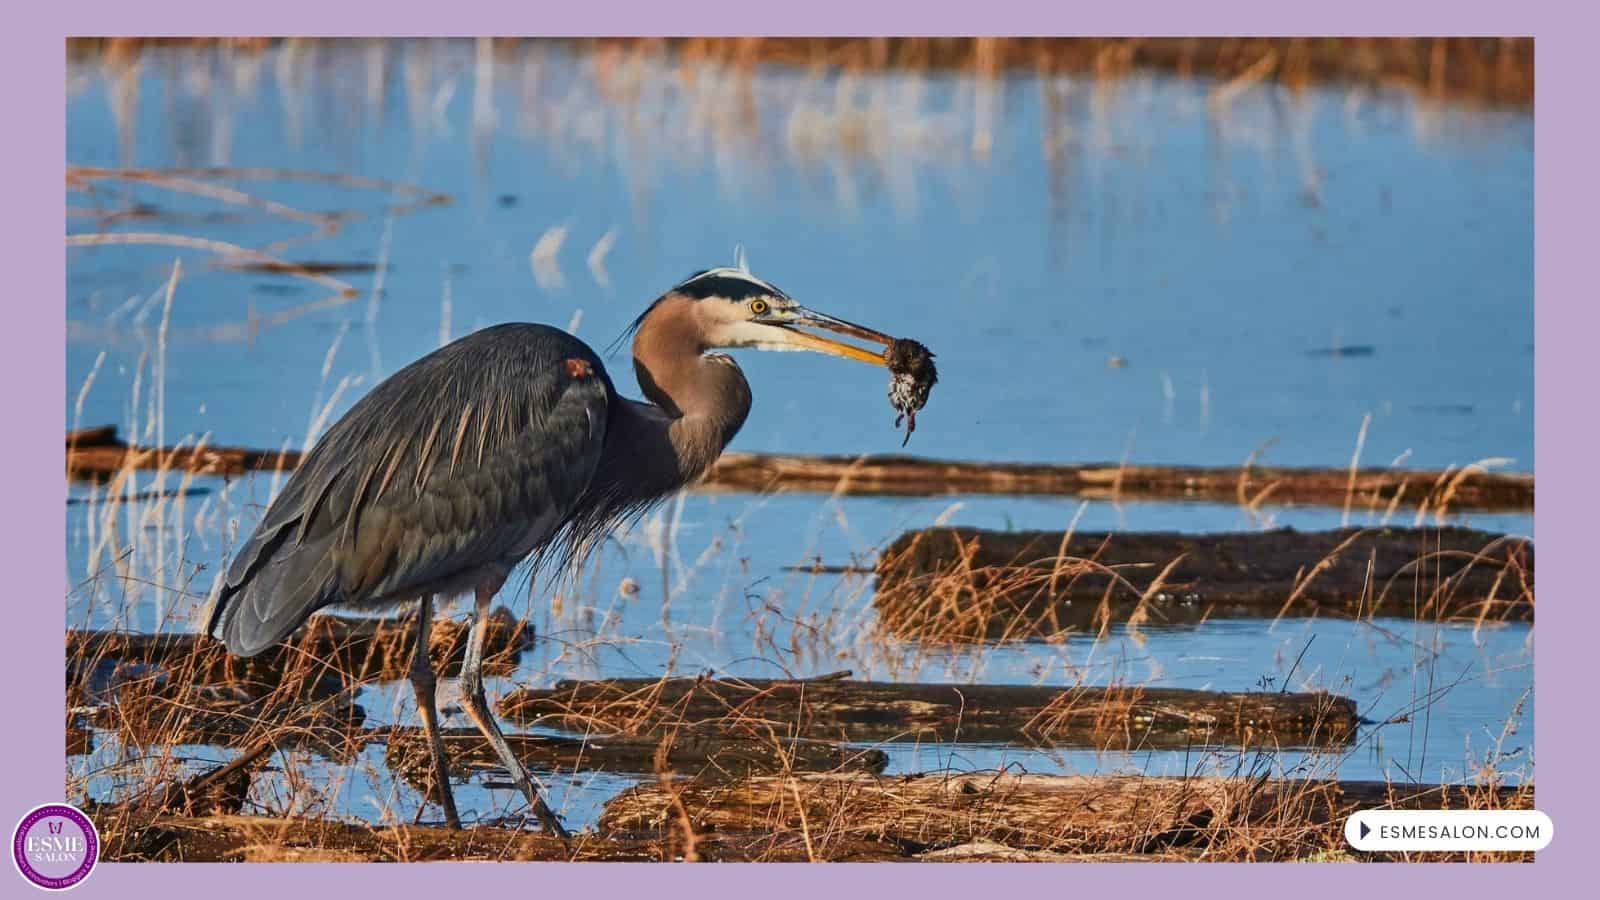 an image of a Great Blue Heron that caught a vole